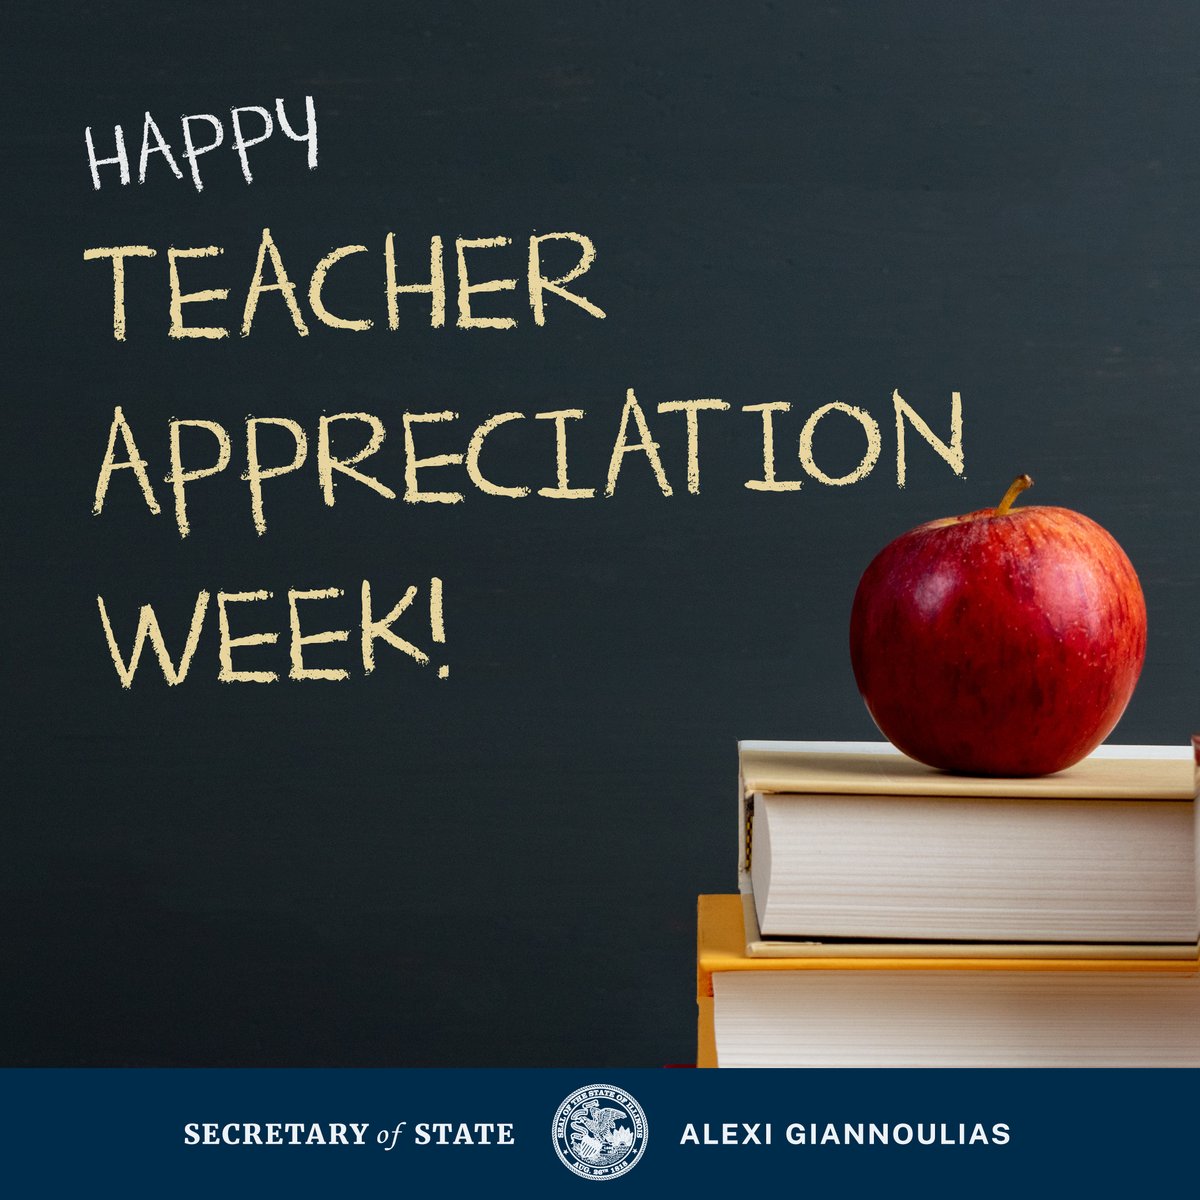 This #TeacherAppreciationWeek, we recognize the incredible impact of educators who shape minds and futures. Thank you for all you do! 🍎📚